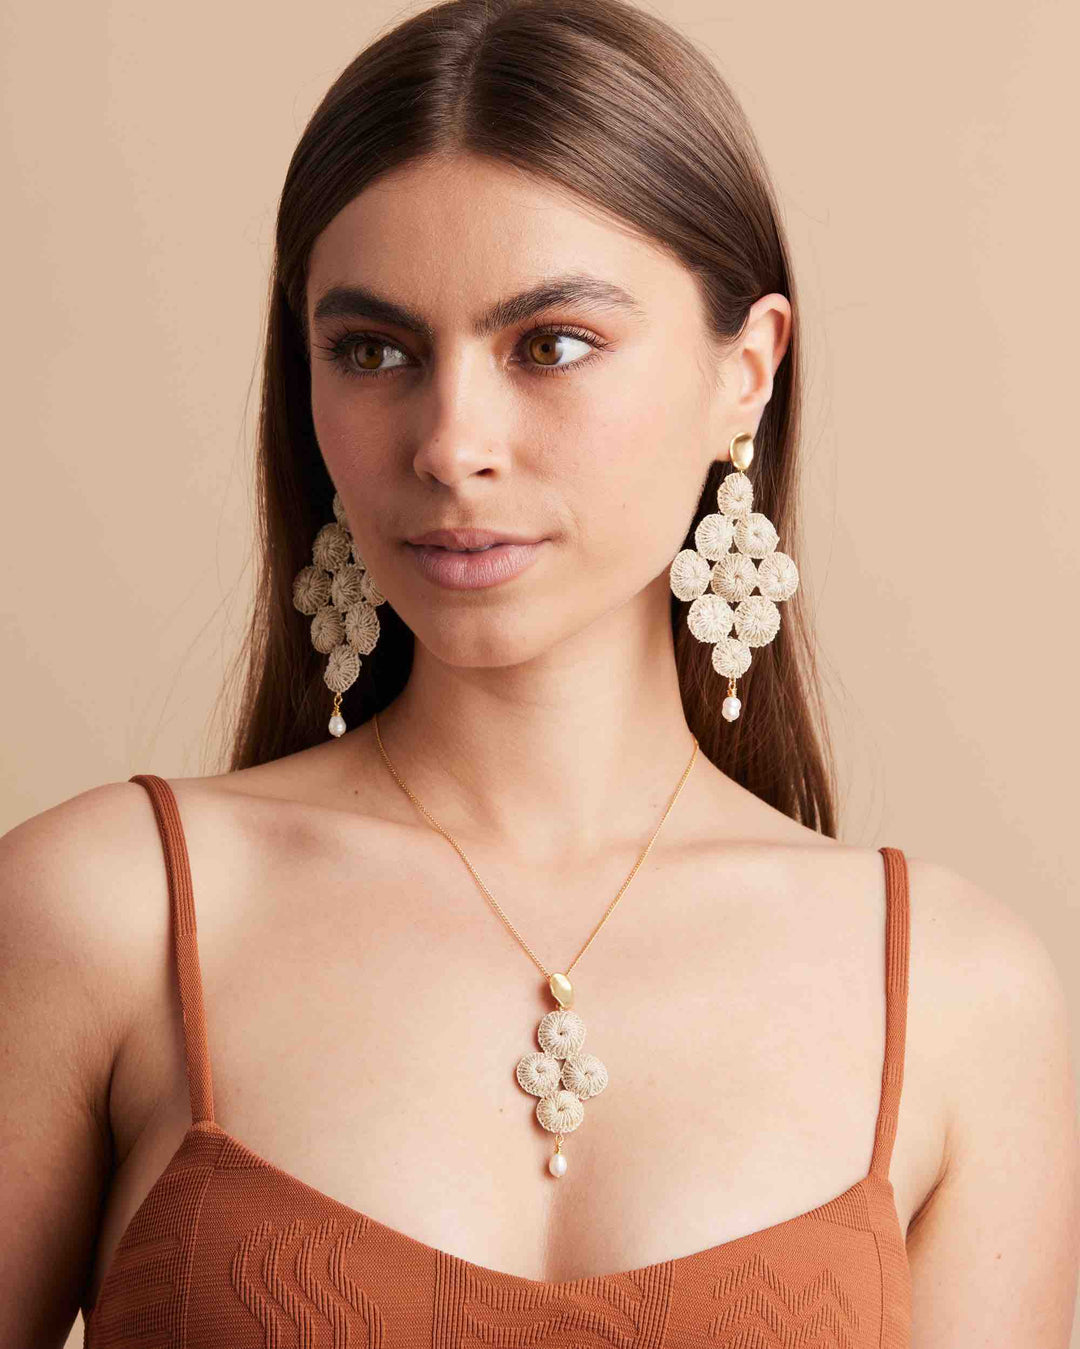 Model wearing bilum and bilas statement earrings and necklace in a brown top